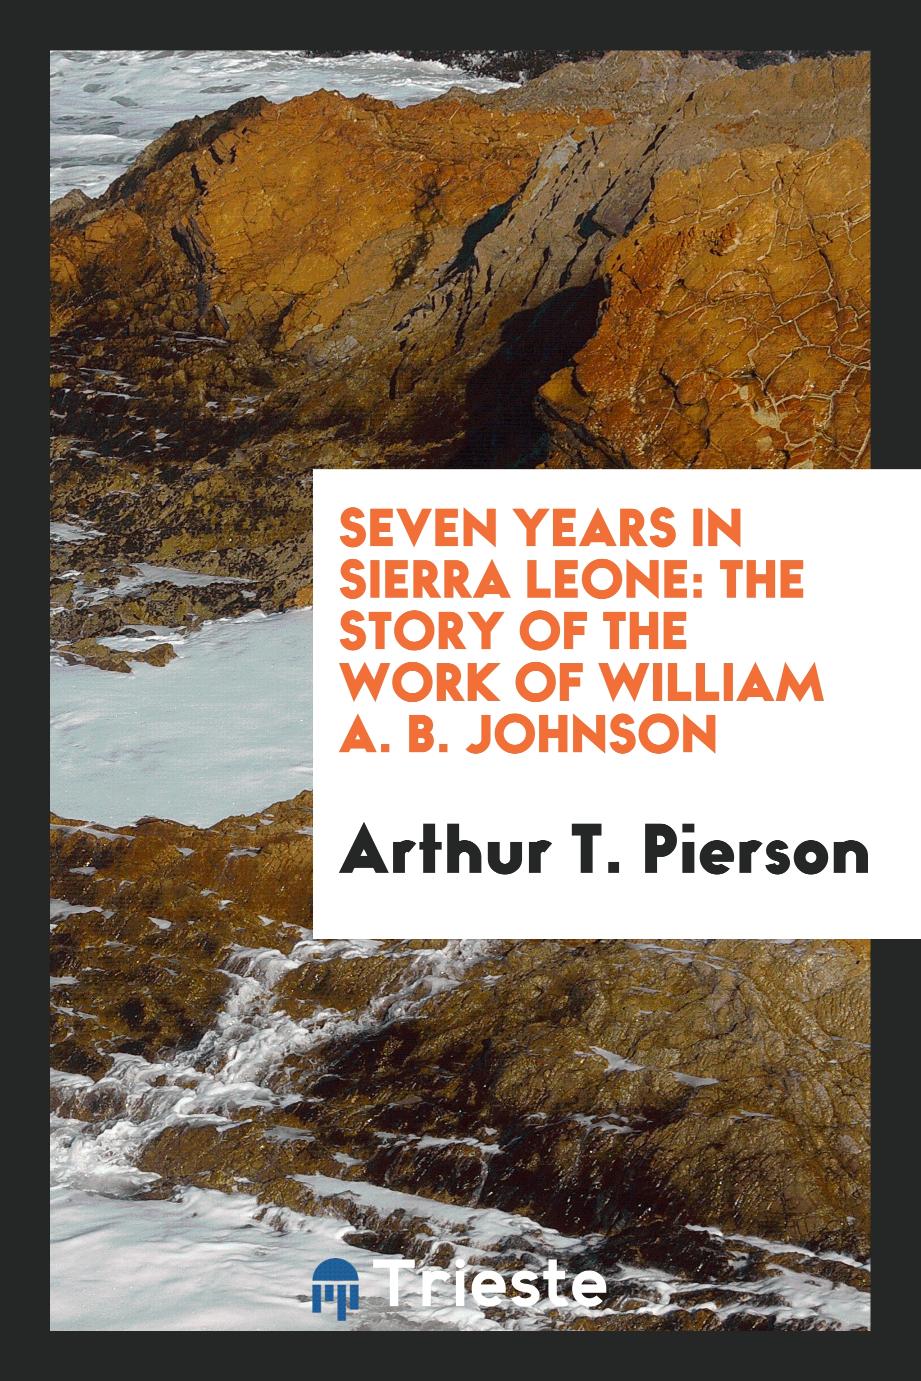 Seven years in Sierra Leone: the story of the work of William A. B. Johnson